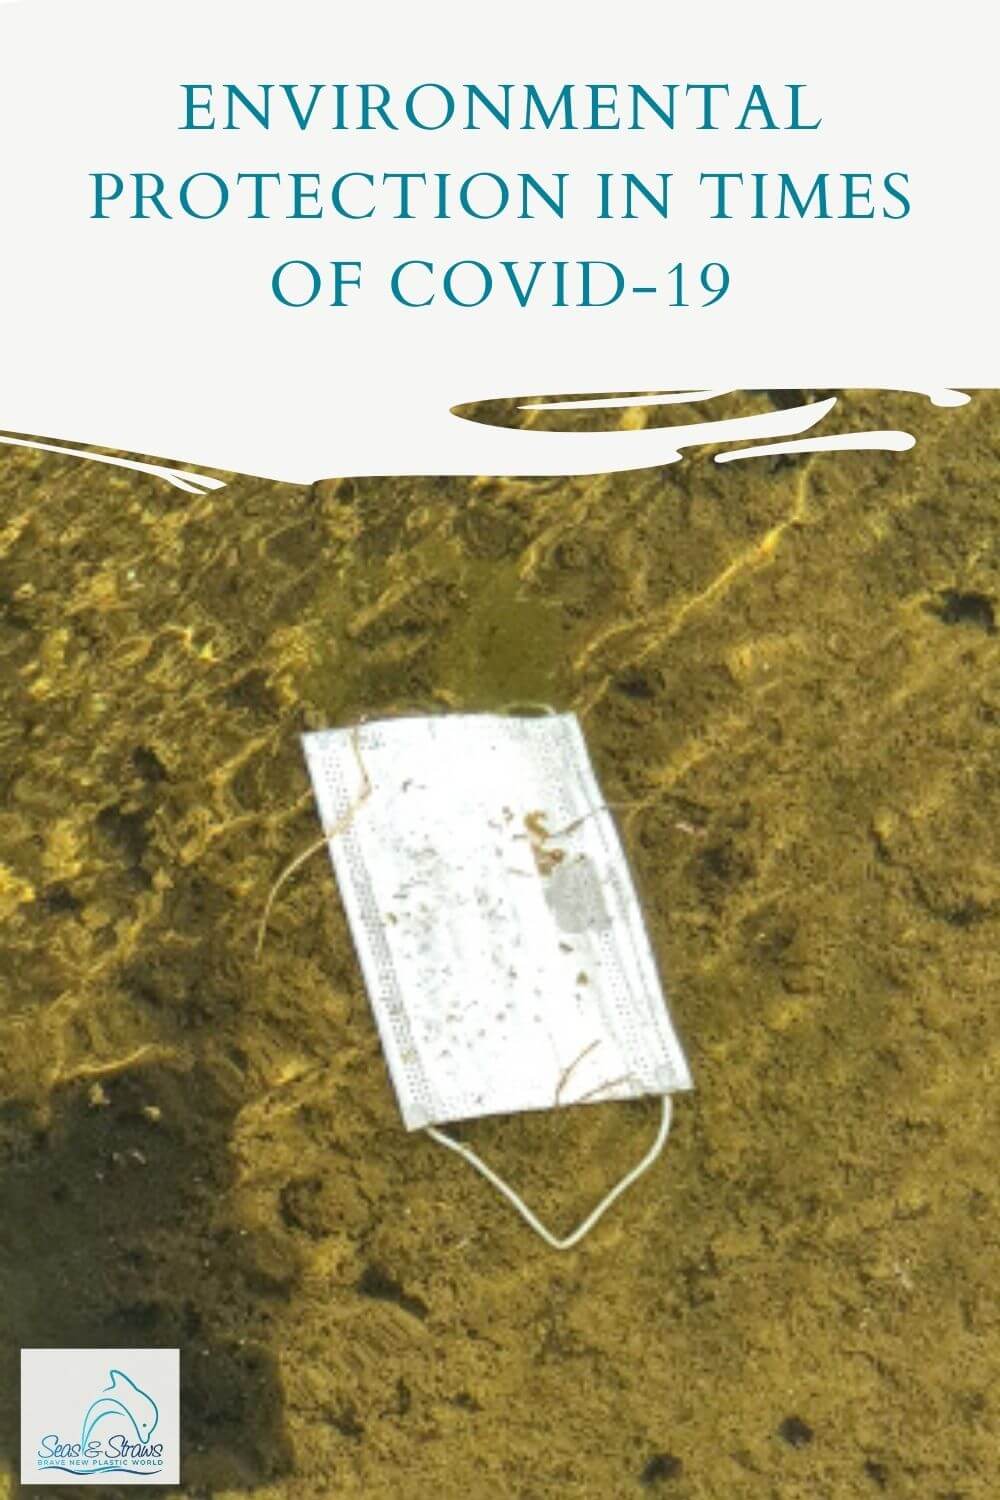 Covid-19 has nullified all advances in plastic reduction and environmental protection. We use more disposable plastic now than ever before. The loser is the environment.